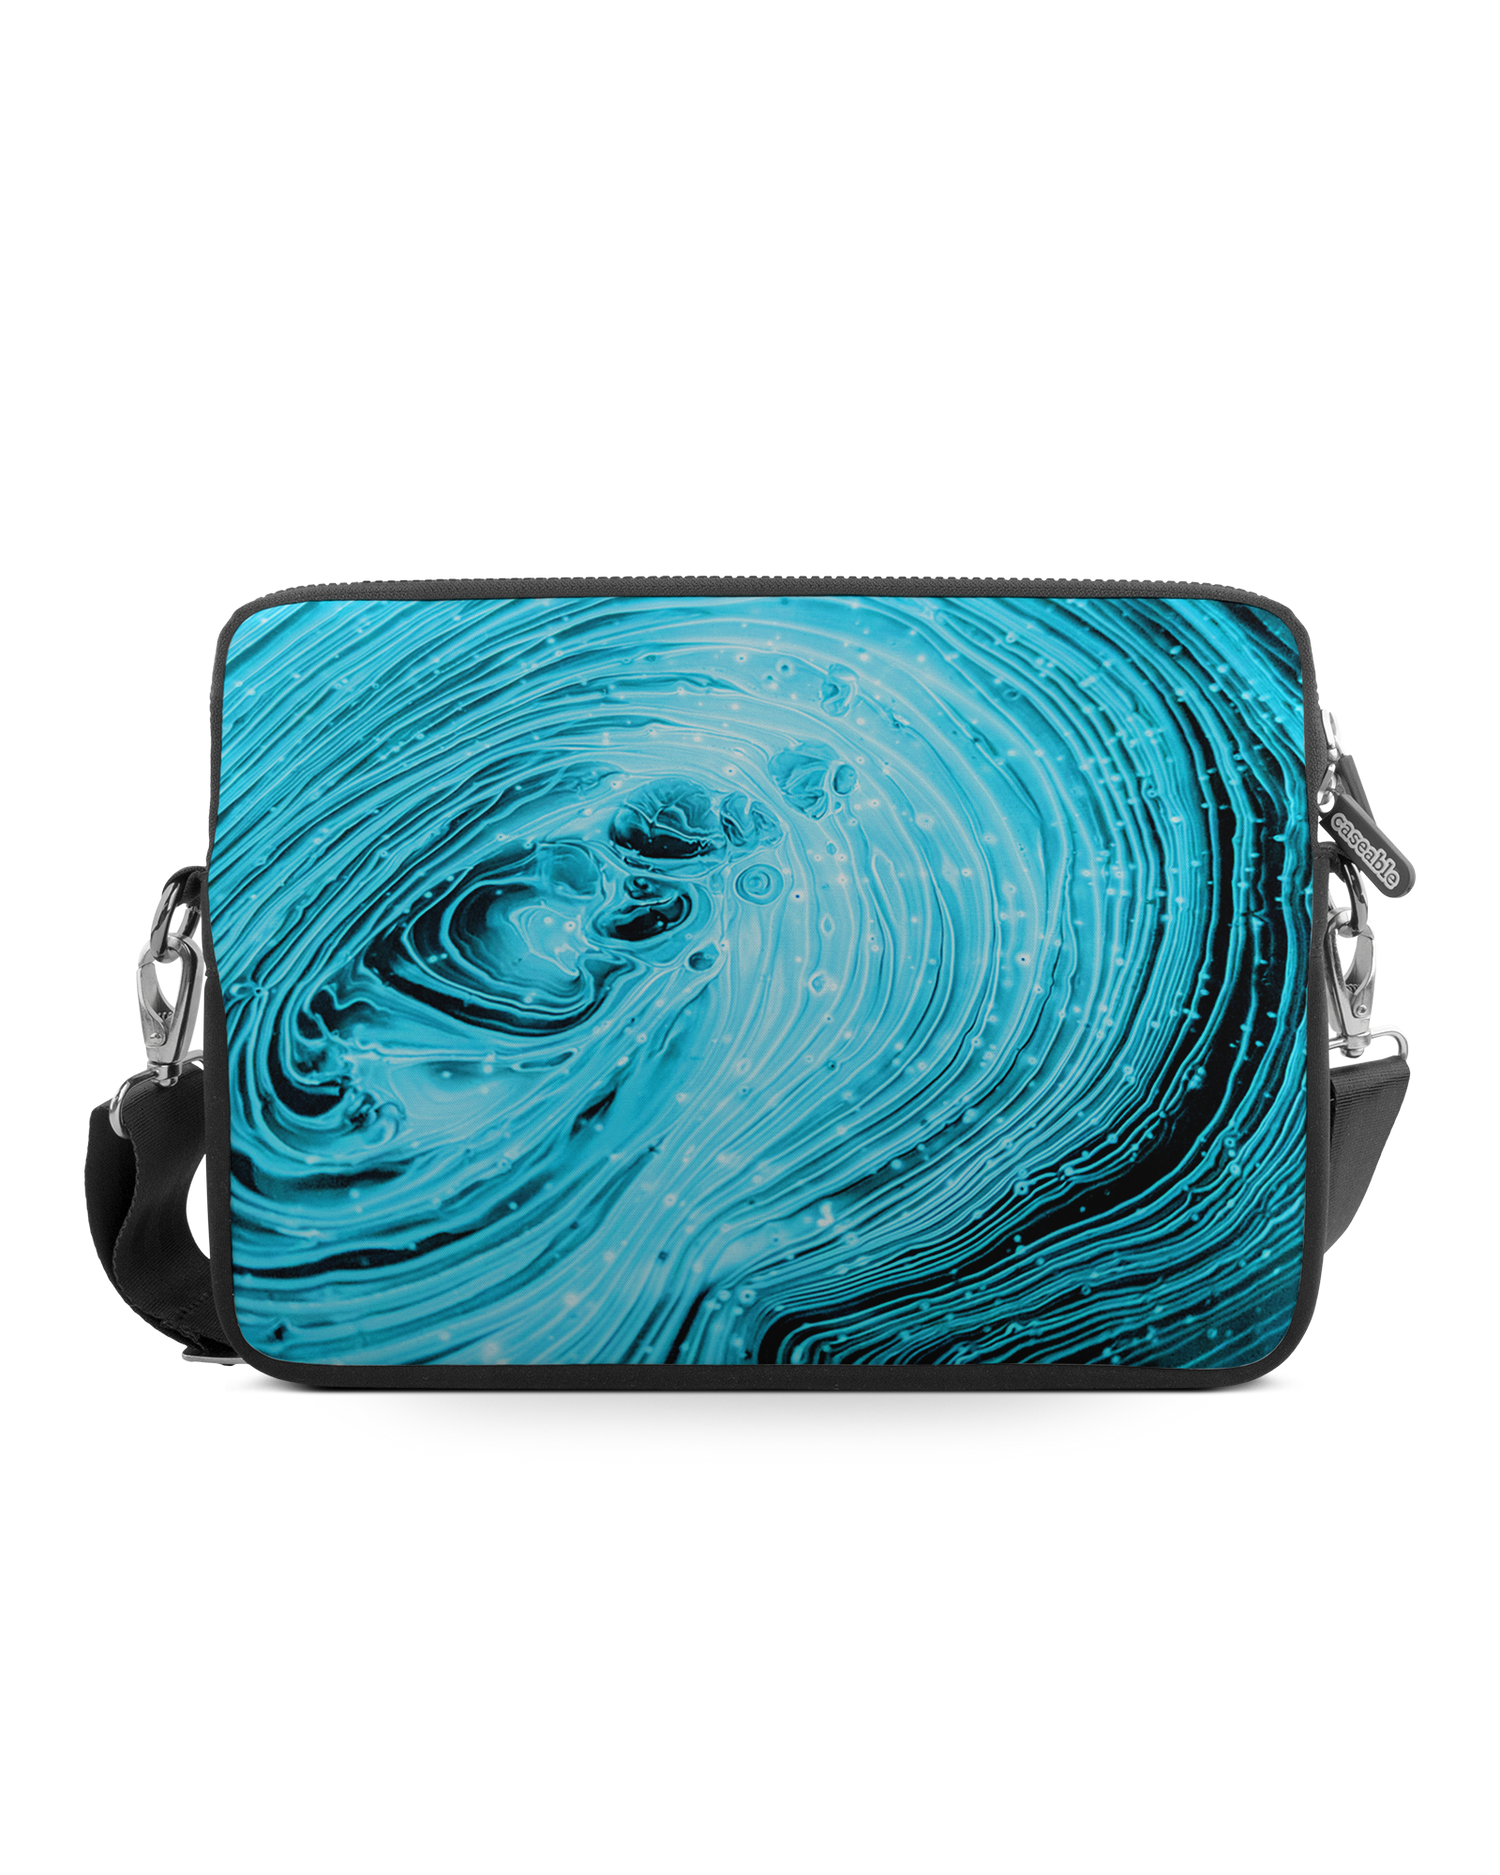 Turquoise Ripples Premium Laptop Bag 13 inch: Front View